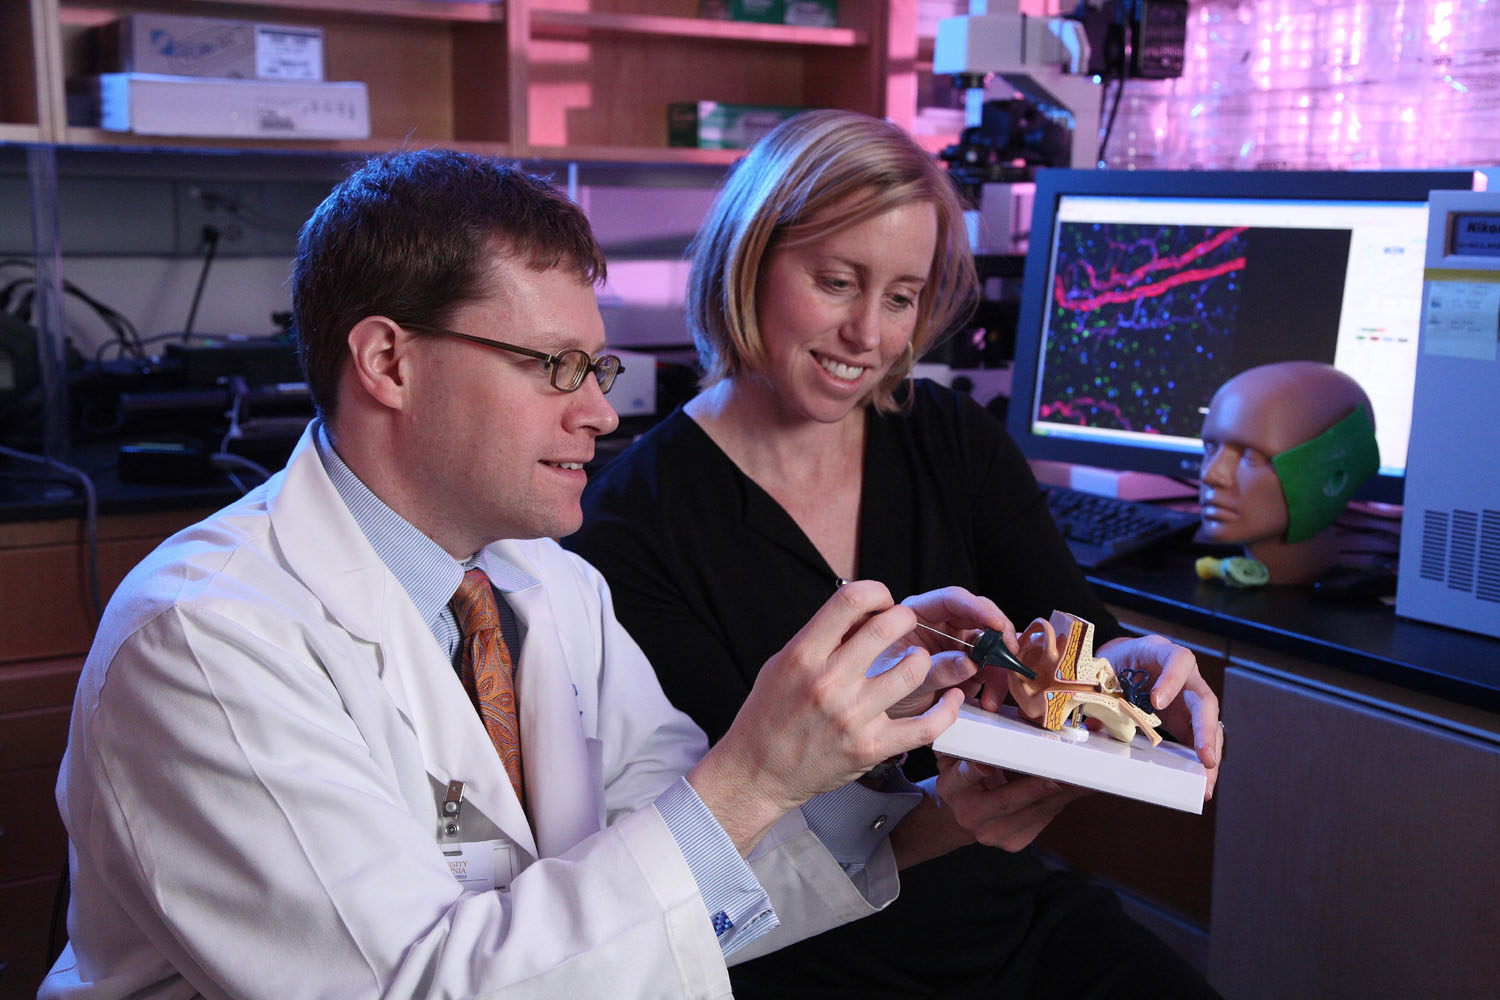 Dr. Bradley Kesser, left, and Shayn Peirce-Cottler, right, working together with a 3d diagram